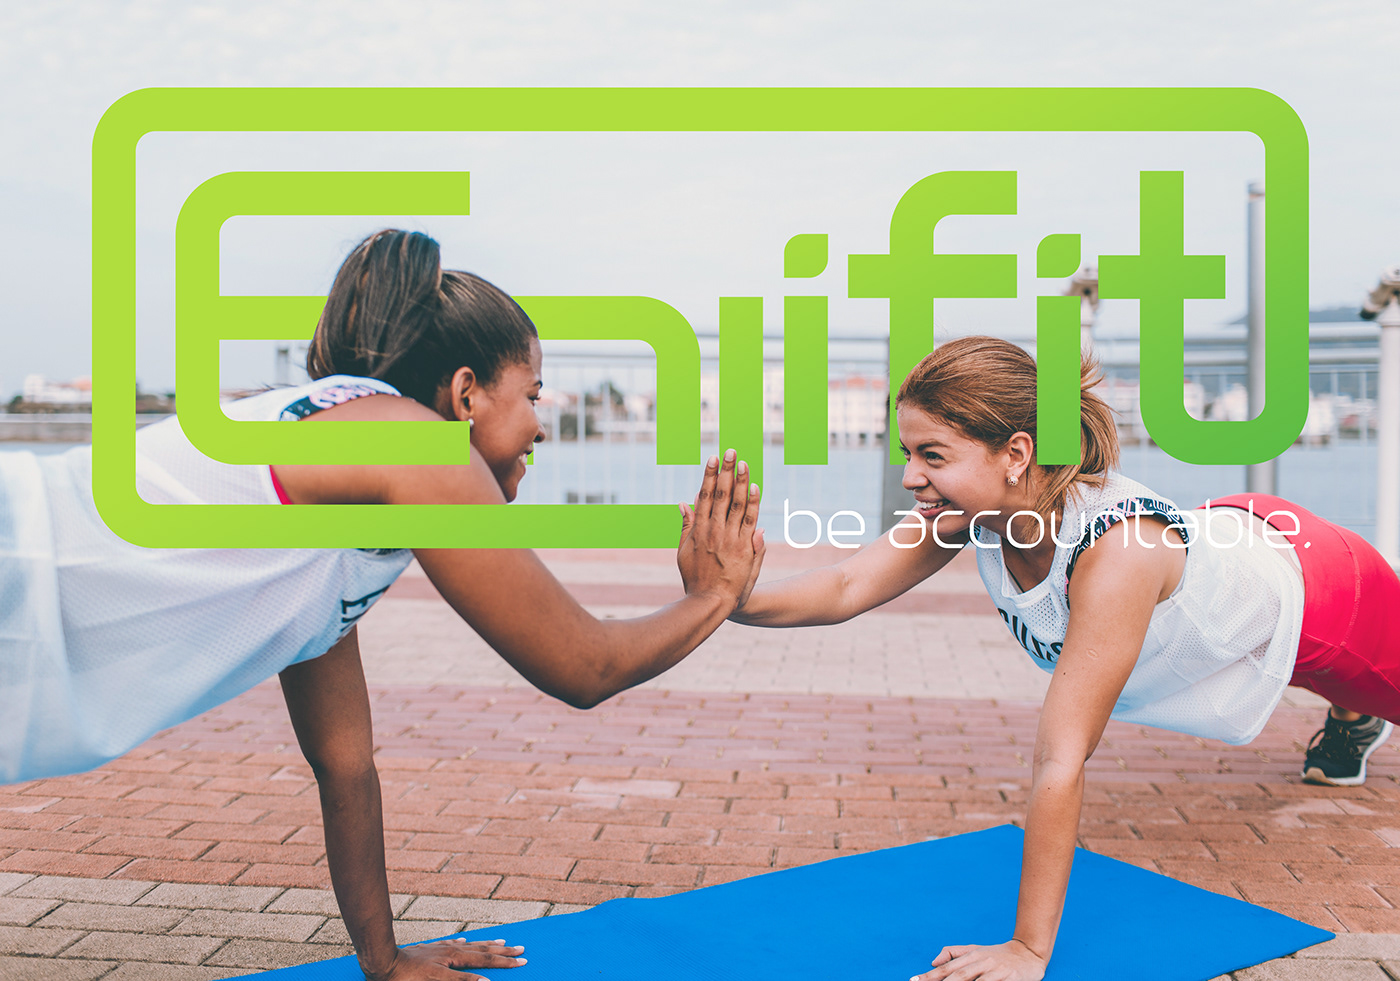 Enjifit logo with woman working out.